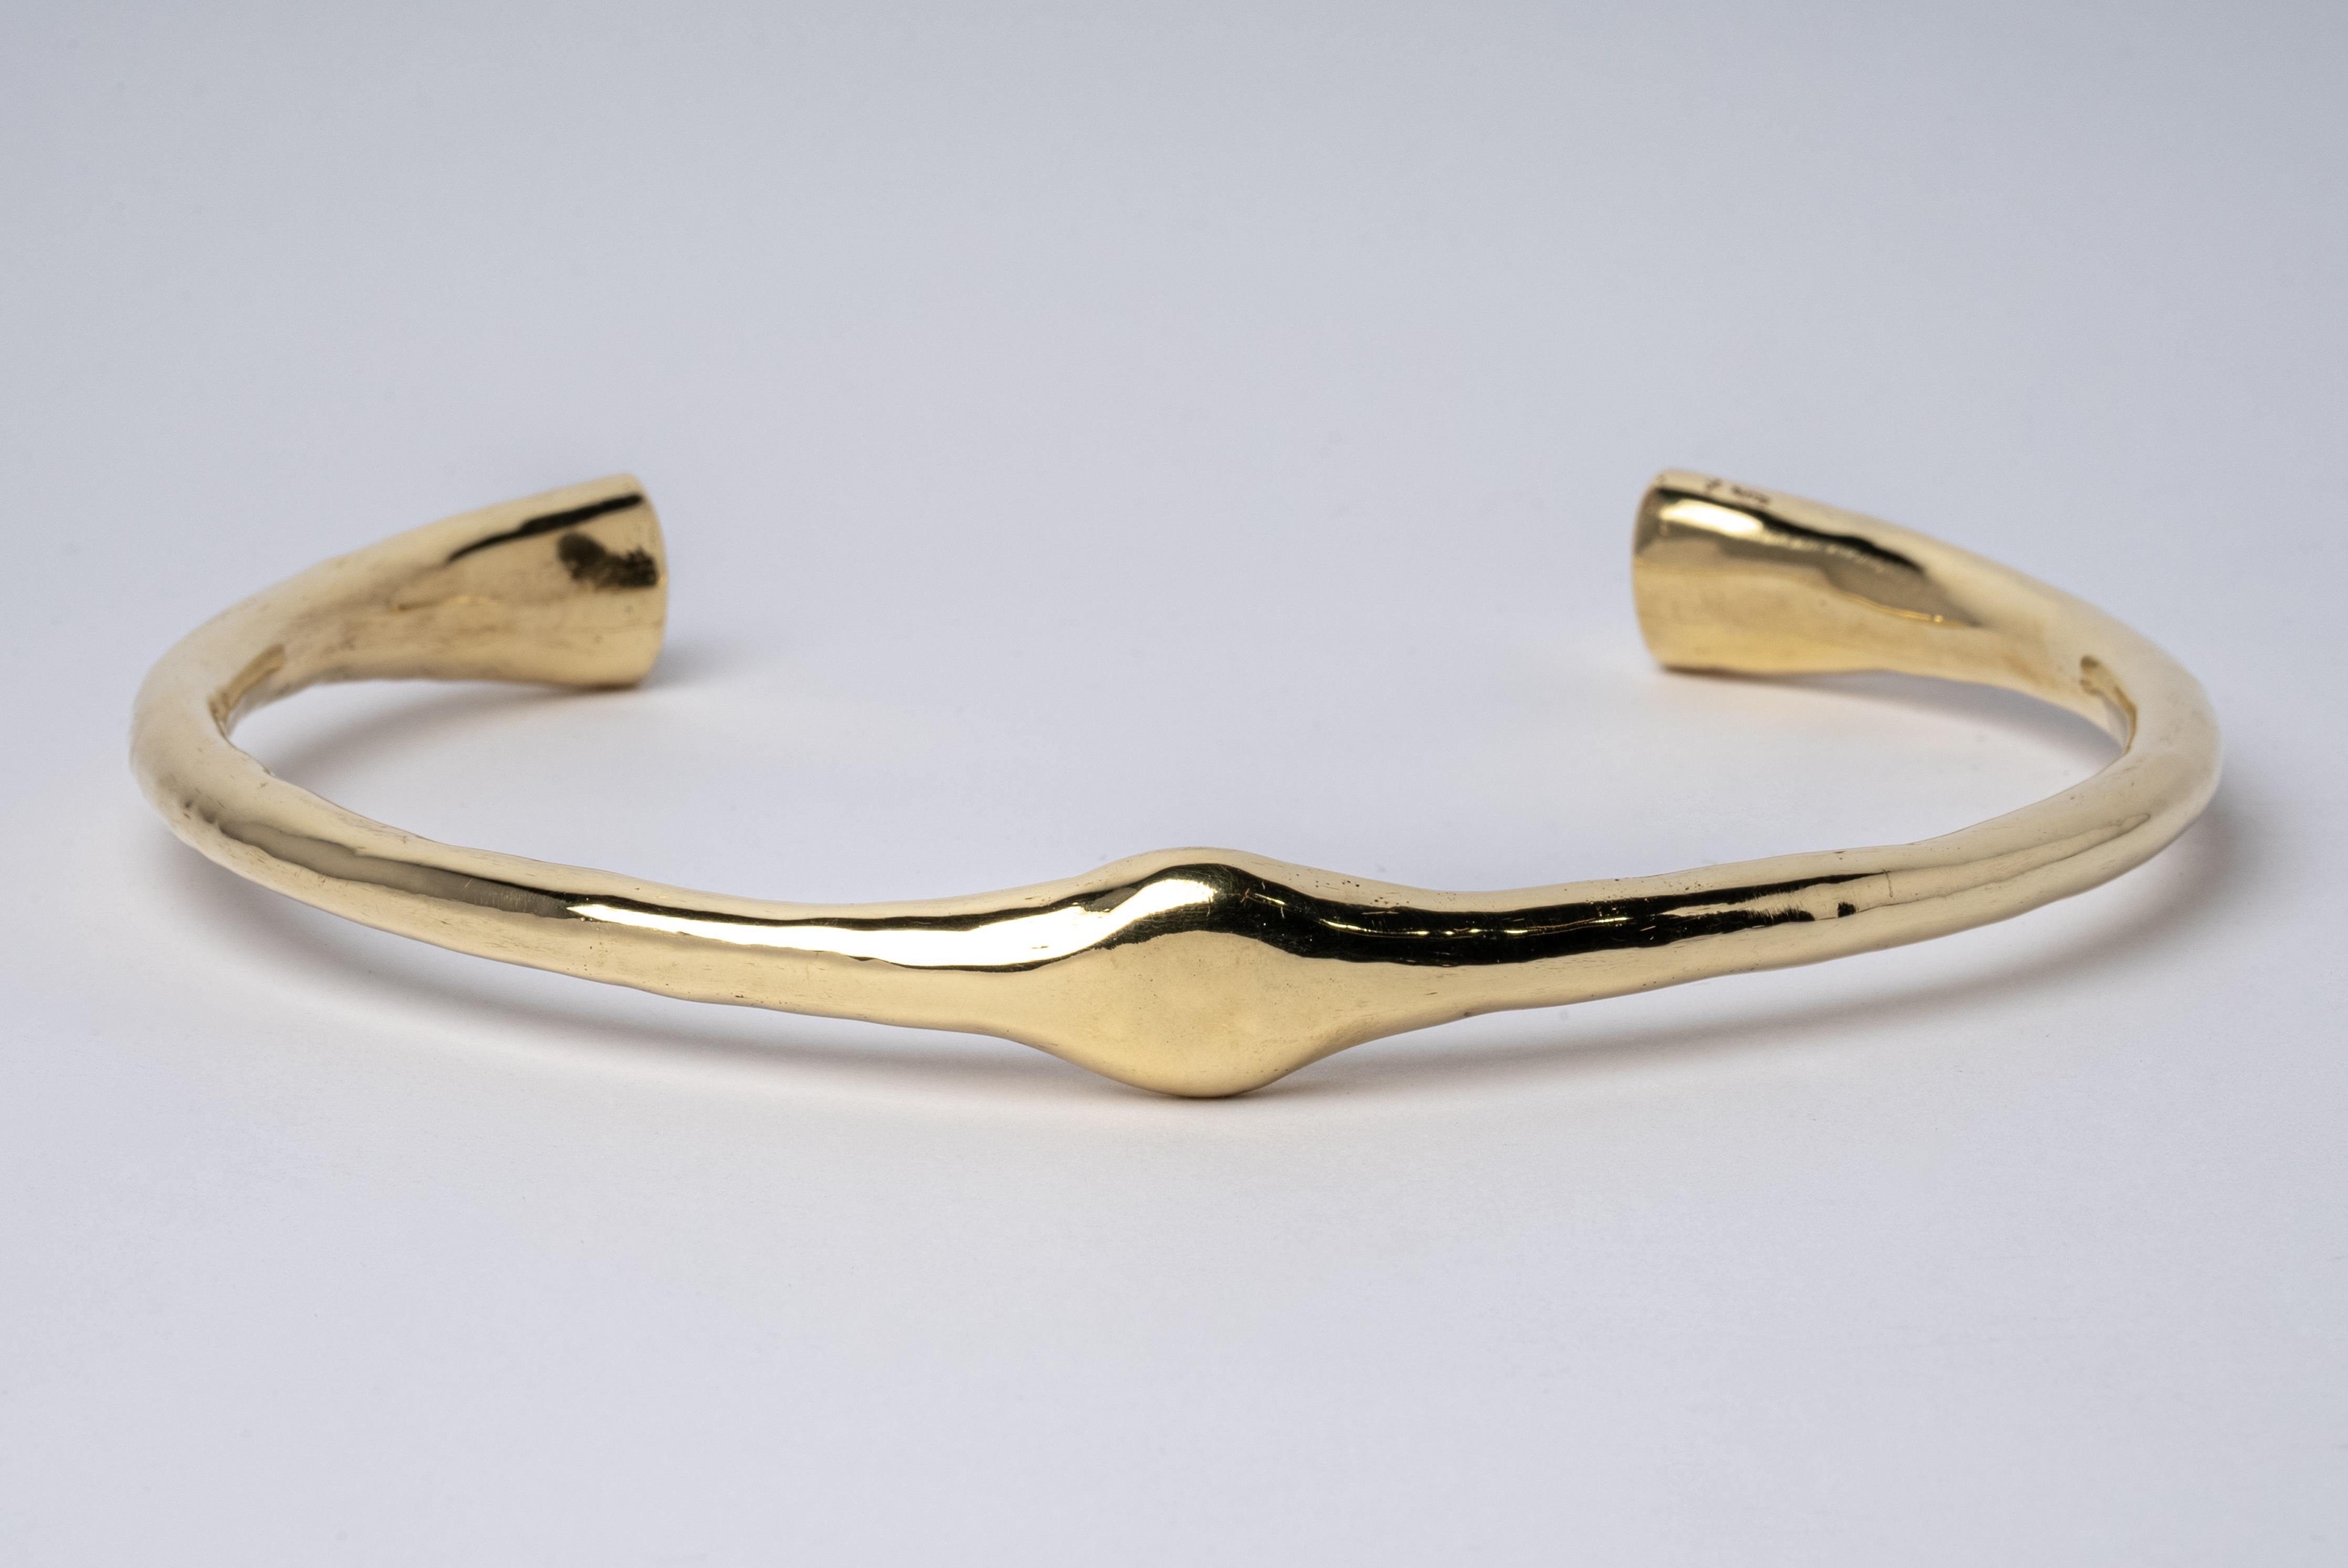 Choker in brass substrate, polished, and electroplated with 18k gold. This piece is 100% hand fabricated from metal plate; cut into sections and soldered together to make the hollow three dimensional form. This piece uses creation methods and